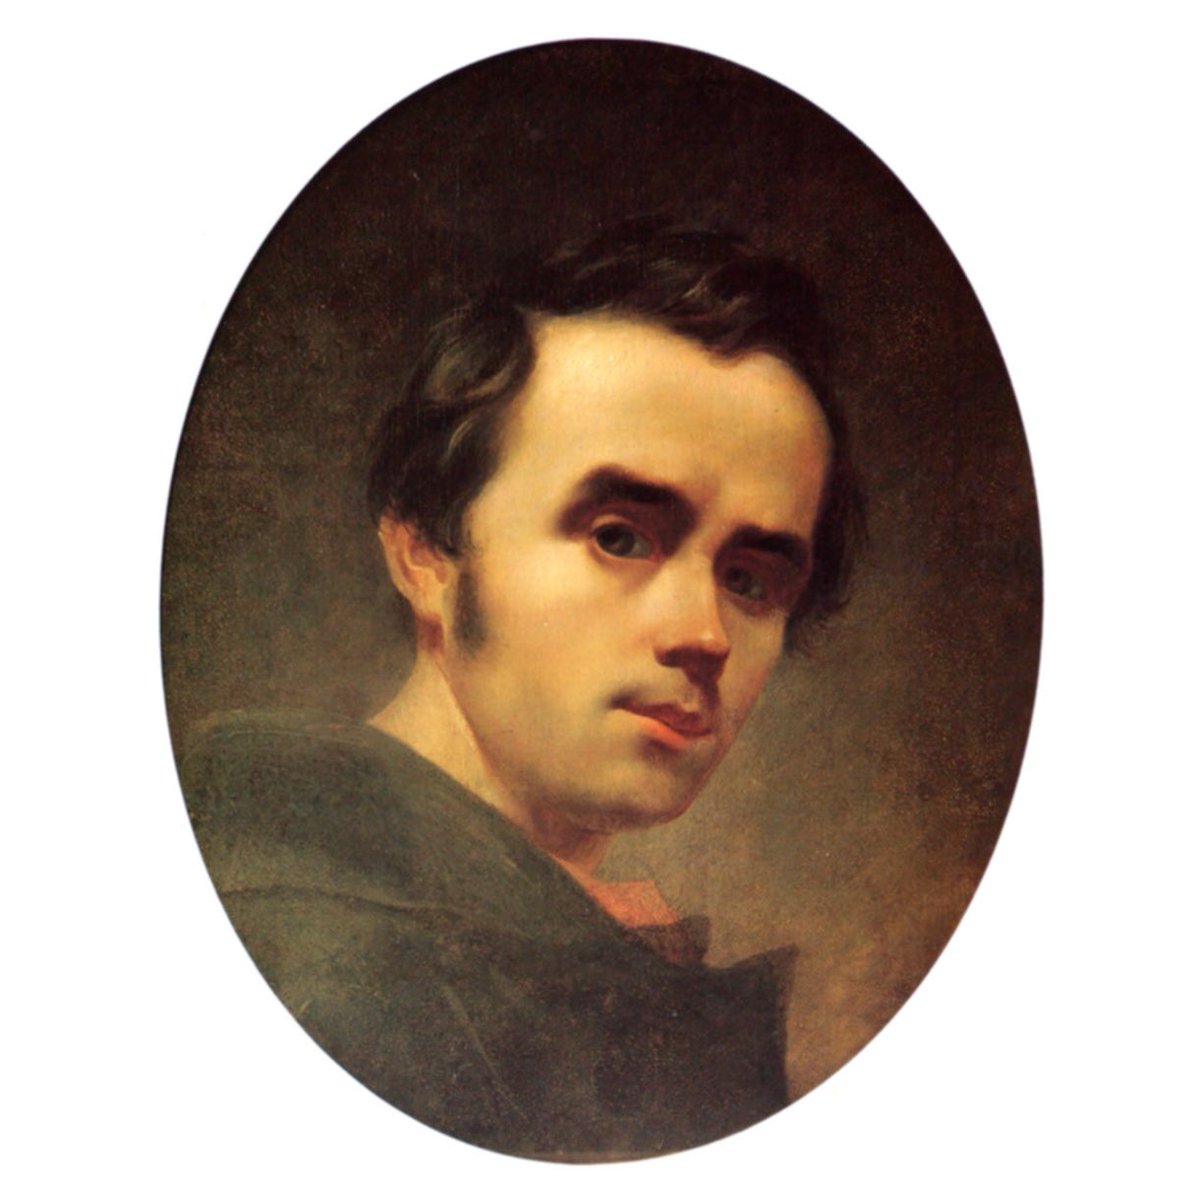 Taras Shevchenko, Ukraine's poetic genius, was born 210 years ago today. His works are at the heart of the Ukrainian people. They have carried our nation through centuries and continue to do so now. P.S. He mastered the selfie genre in 1840, when insta stories were still oval.